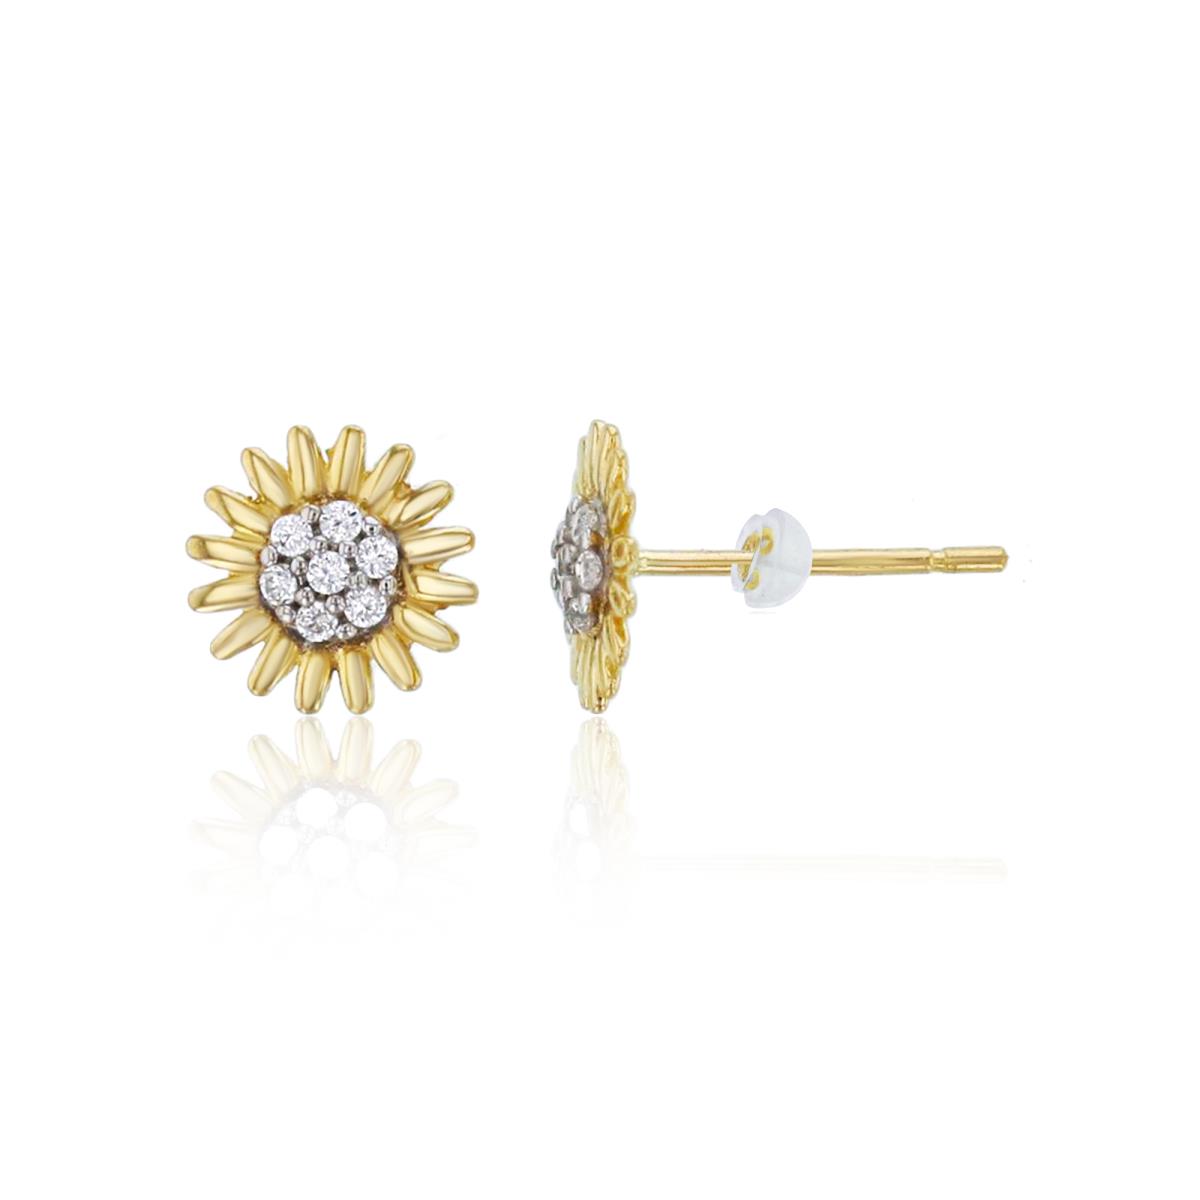 14K Yellow Gold Rnd CZ Textured Flower Studs with 4.5mm Clutch